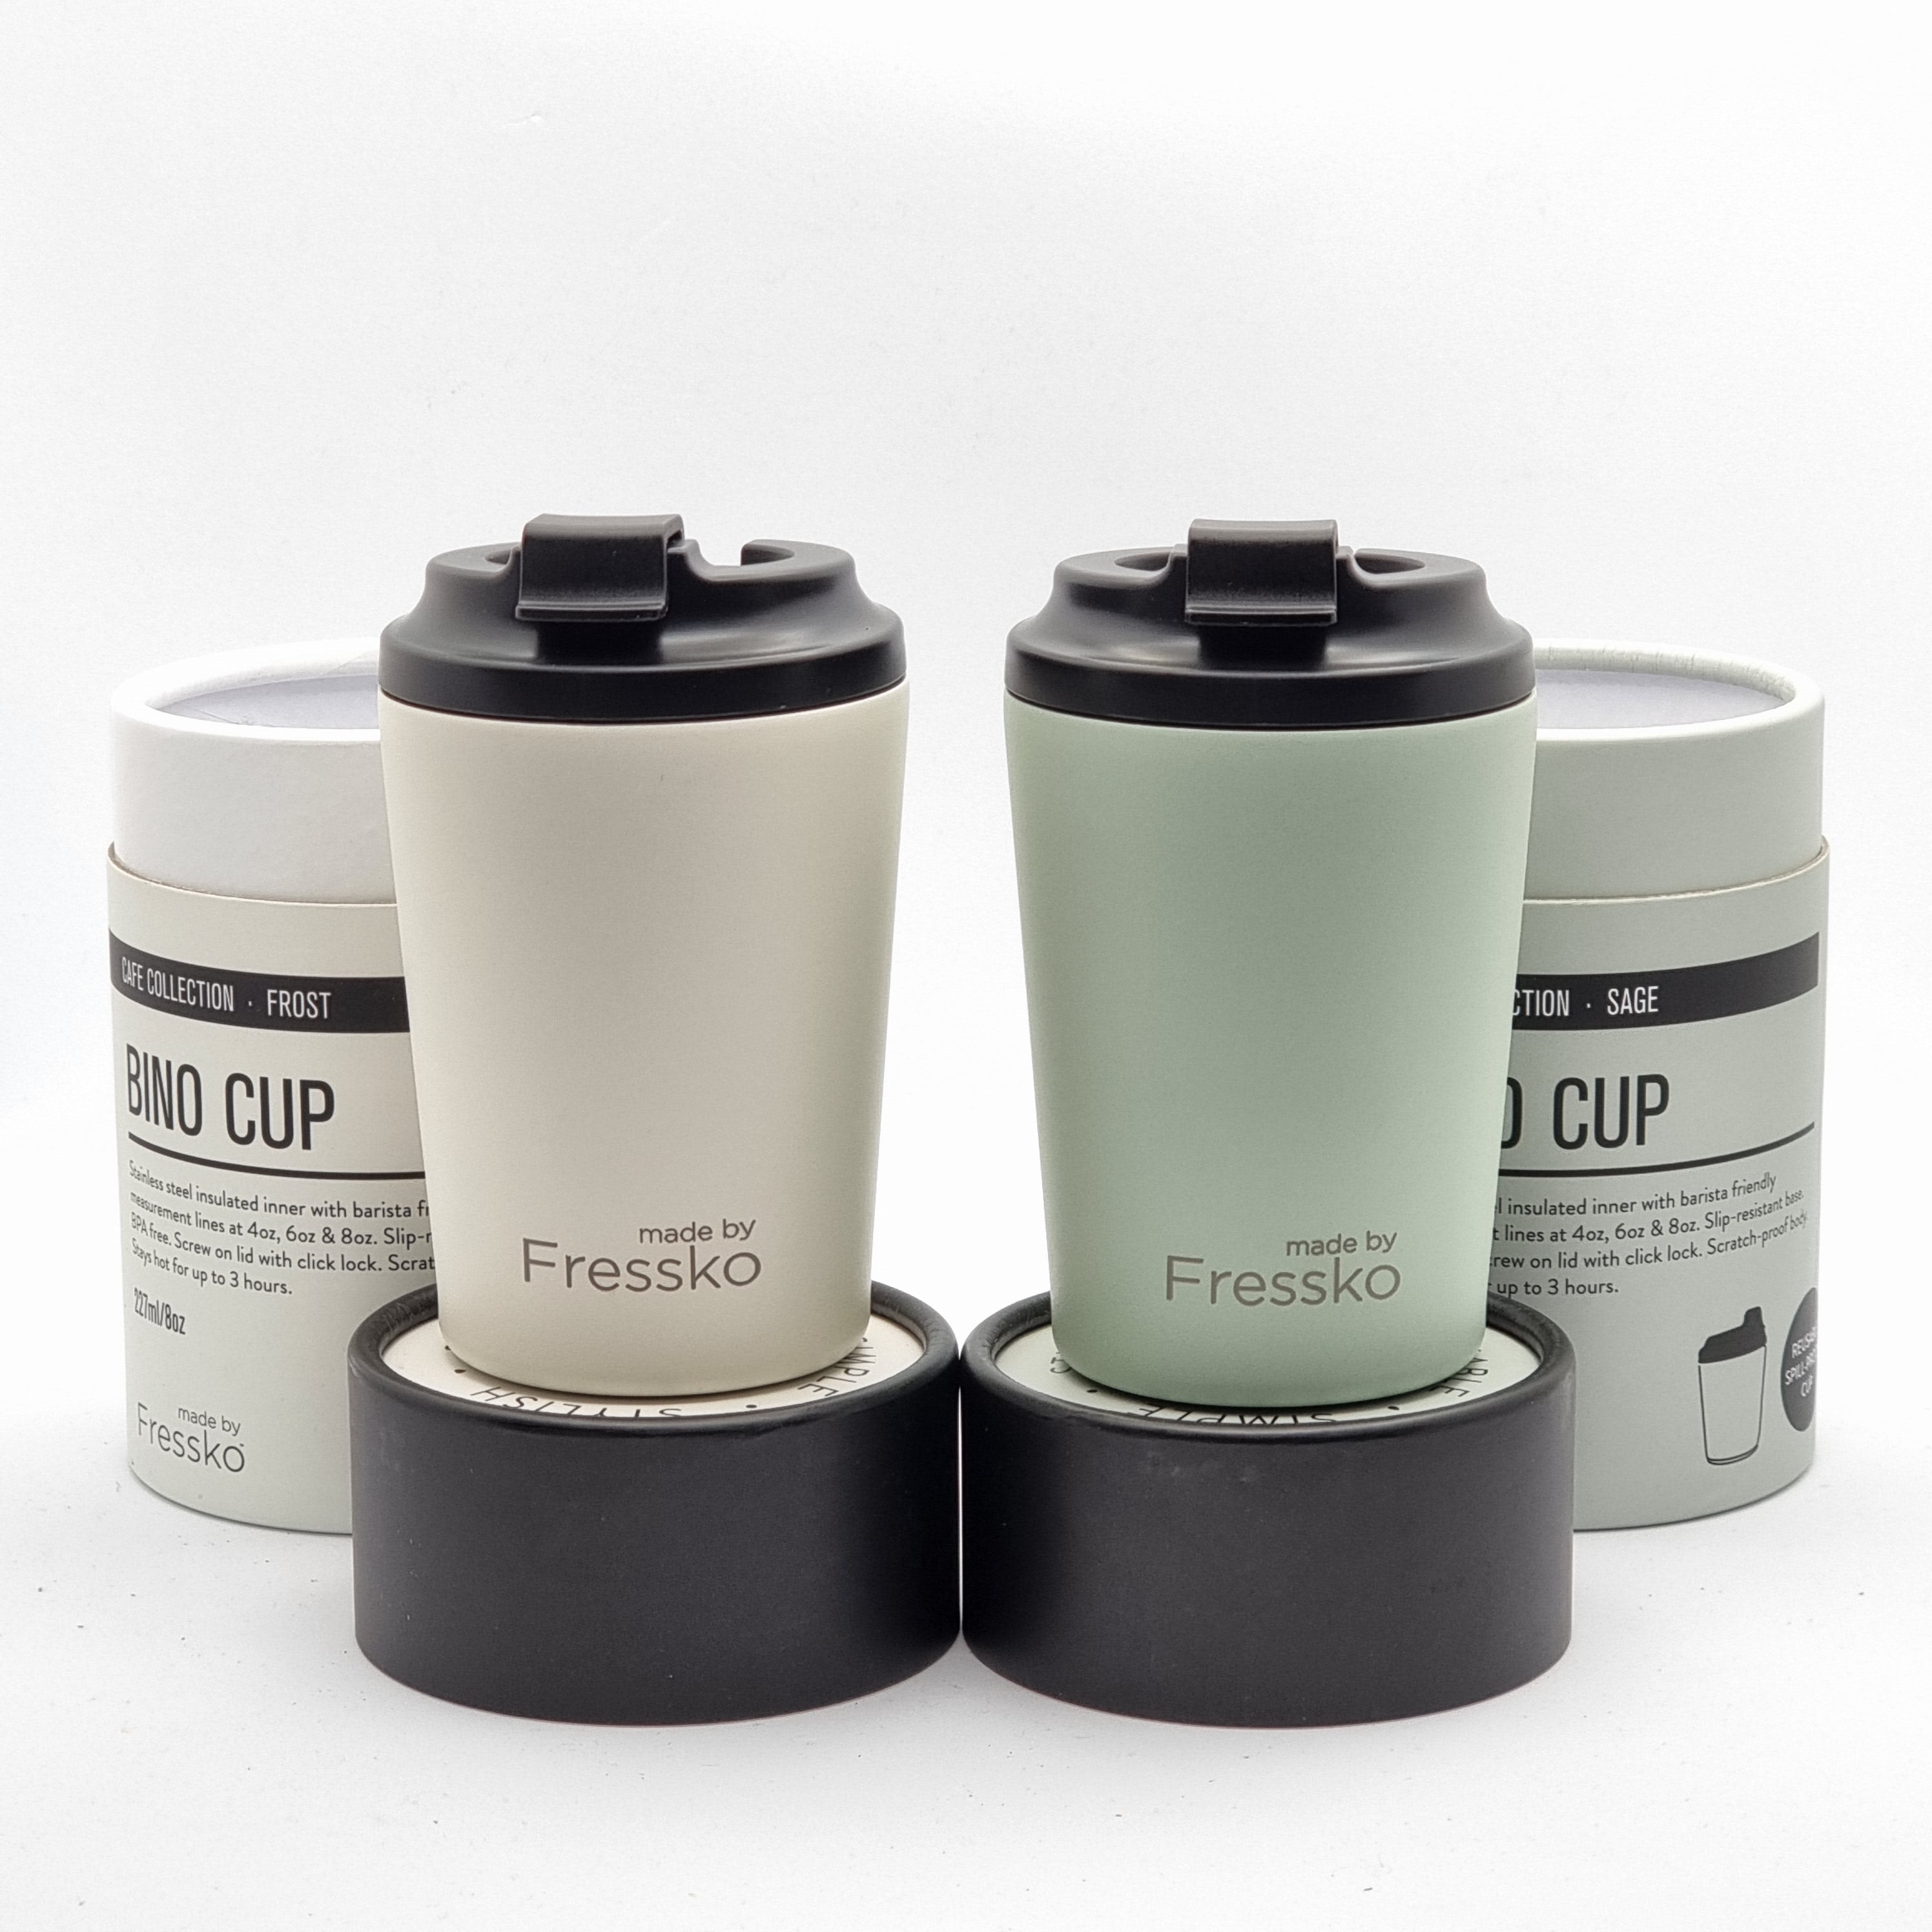 Made by Fressko Sustainable Reusable Cafe Coffee Cups